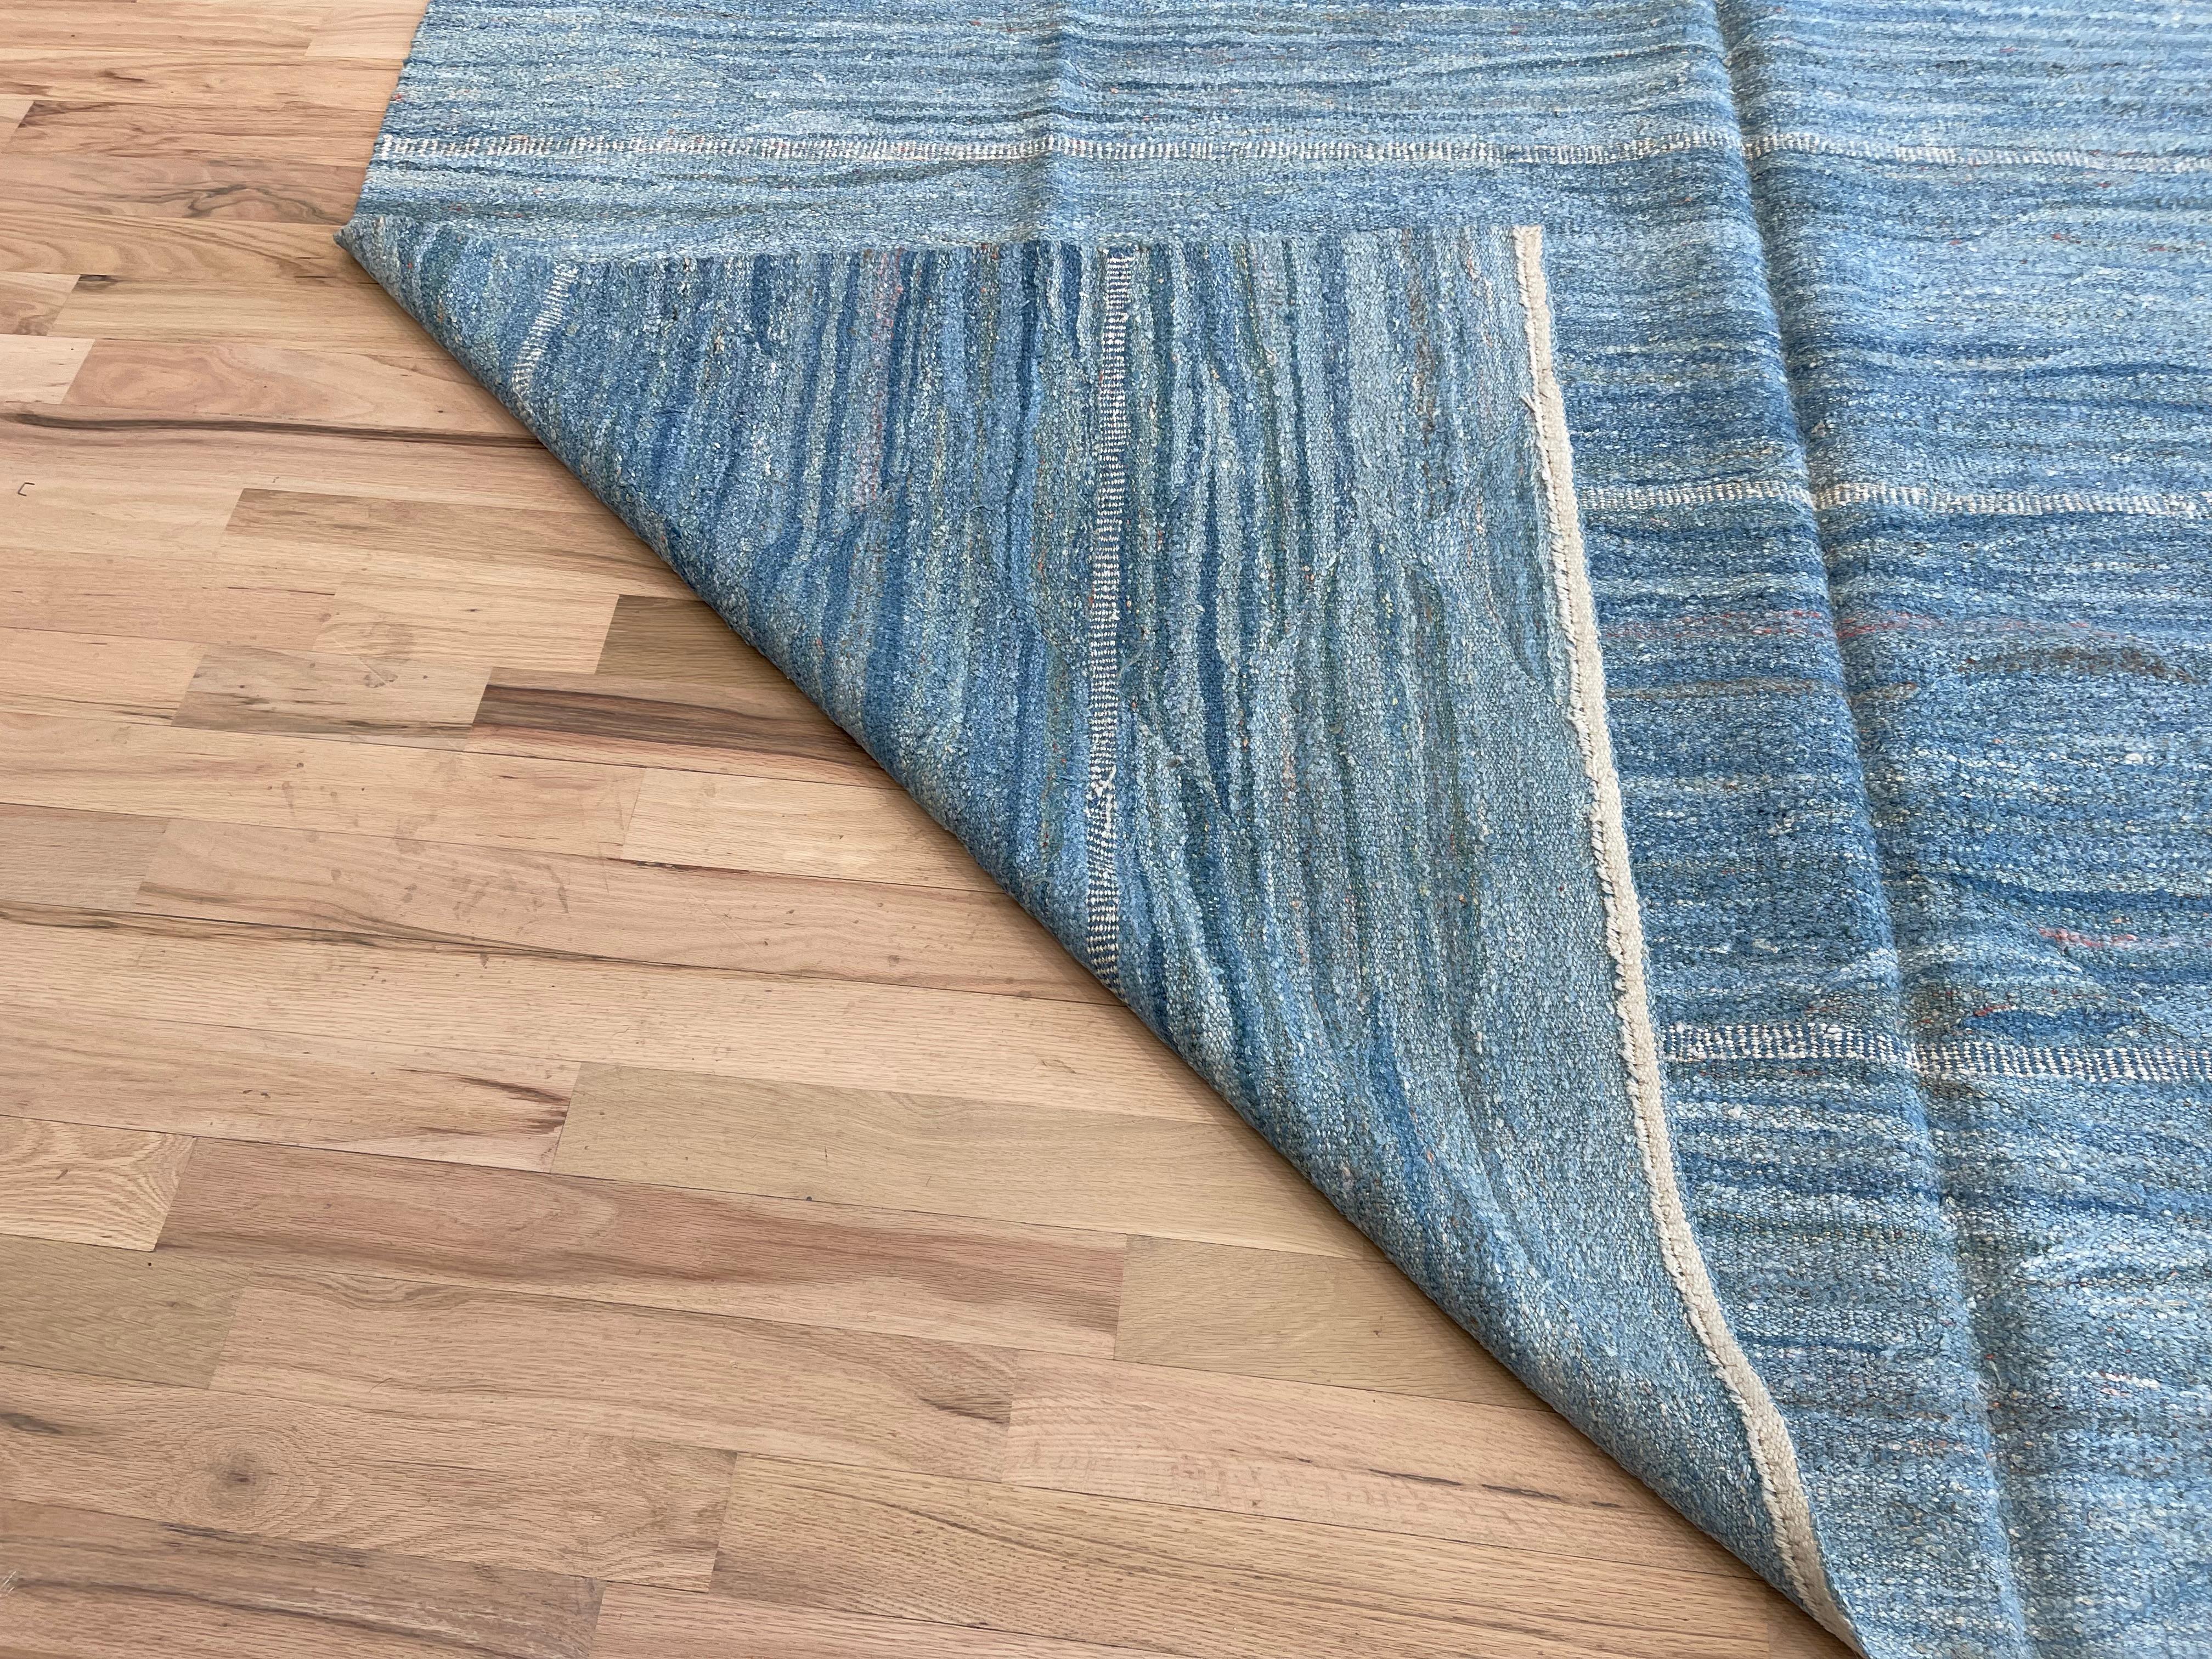 Elevate your home decor with our Turkish rug, featuring a stunning  shades of blue. With its reversible use, this rug offers versatility and a touch of elegance to any room. Add a pop of color and texture with our high-quality, handcrafted rug.